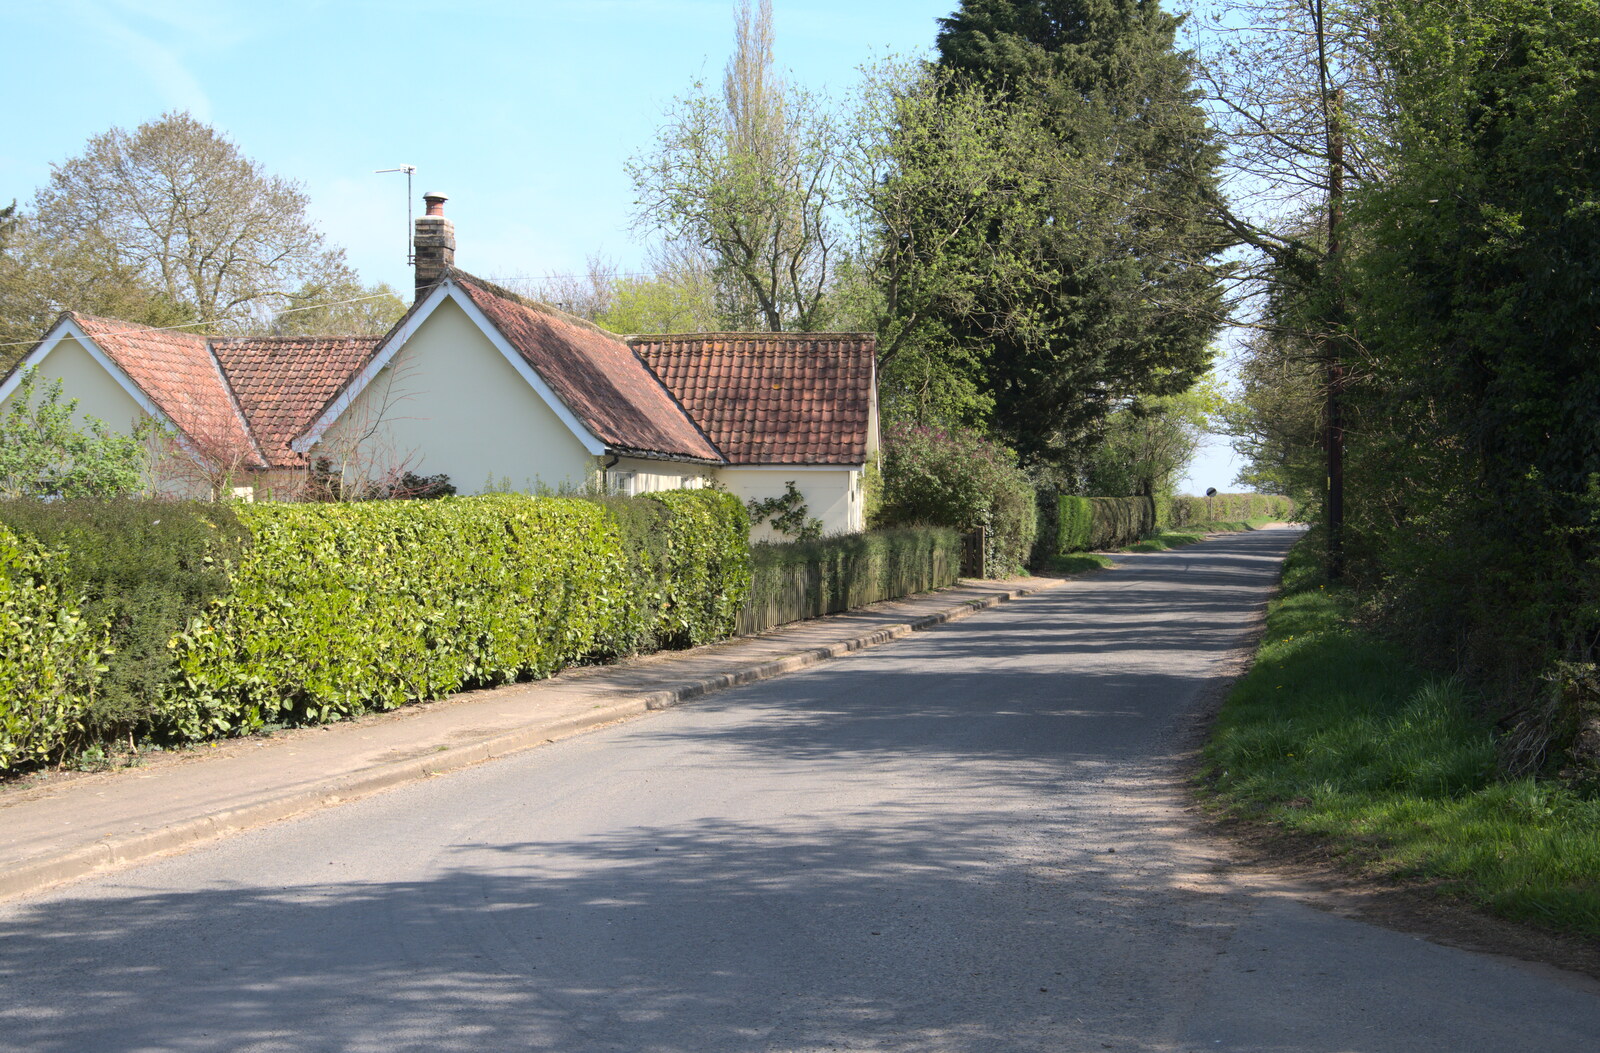 The road up from the church from A Weekend Camping Trip in the Garden, Brome, Suffolk - 11th April 2020